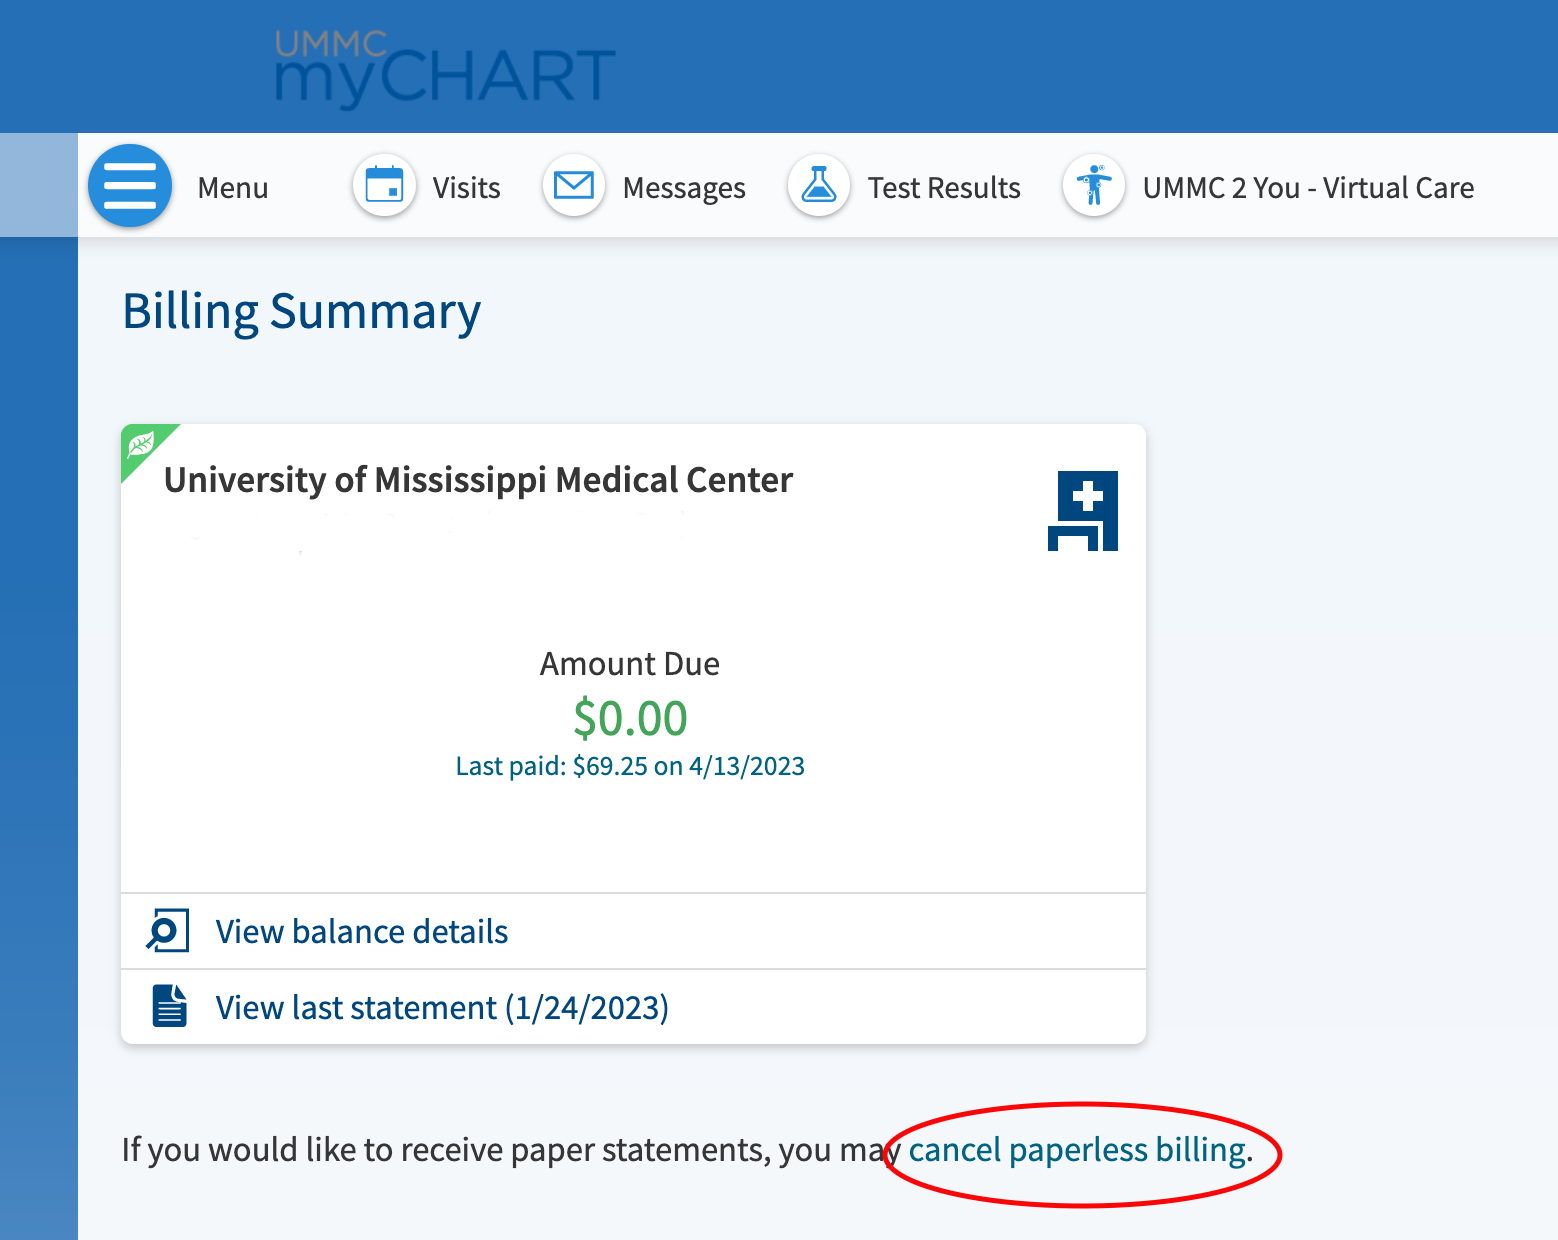 A screenshot of the MyChart Billing Summary shows the link for 